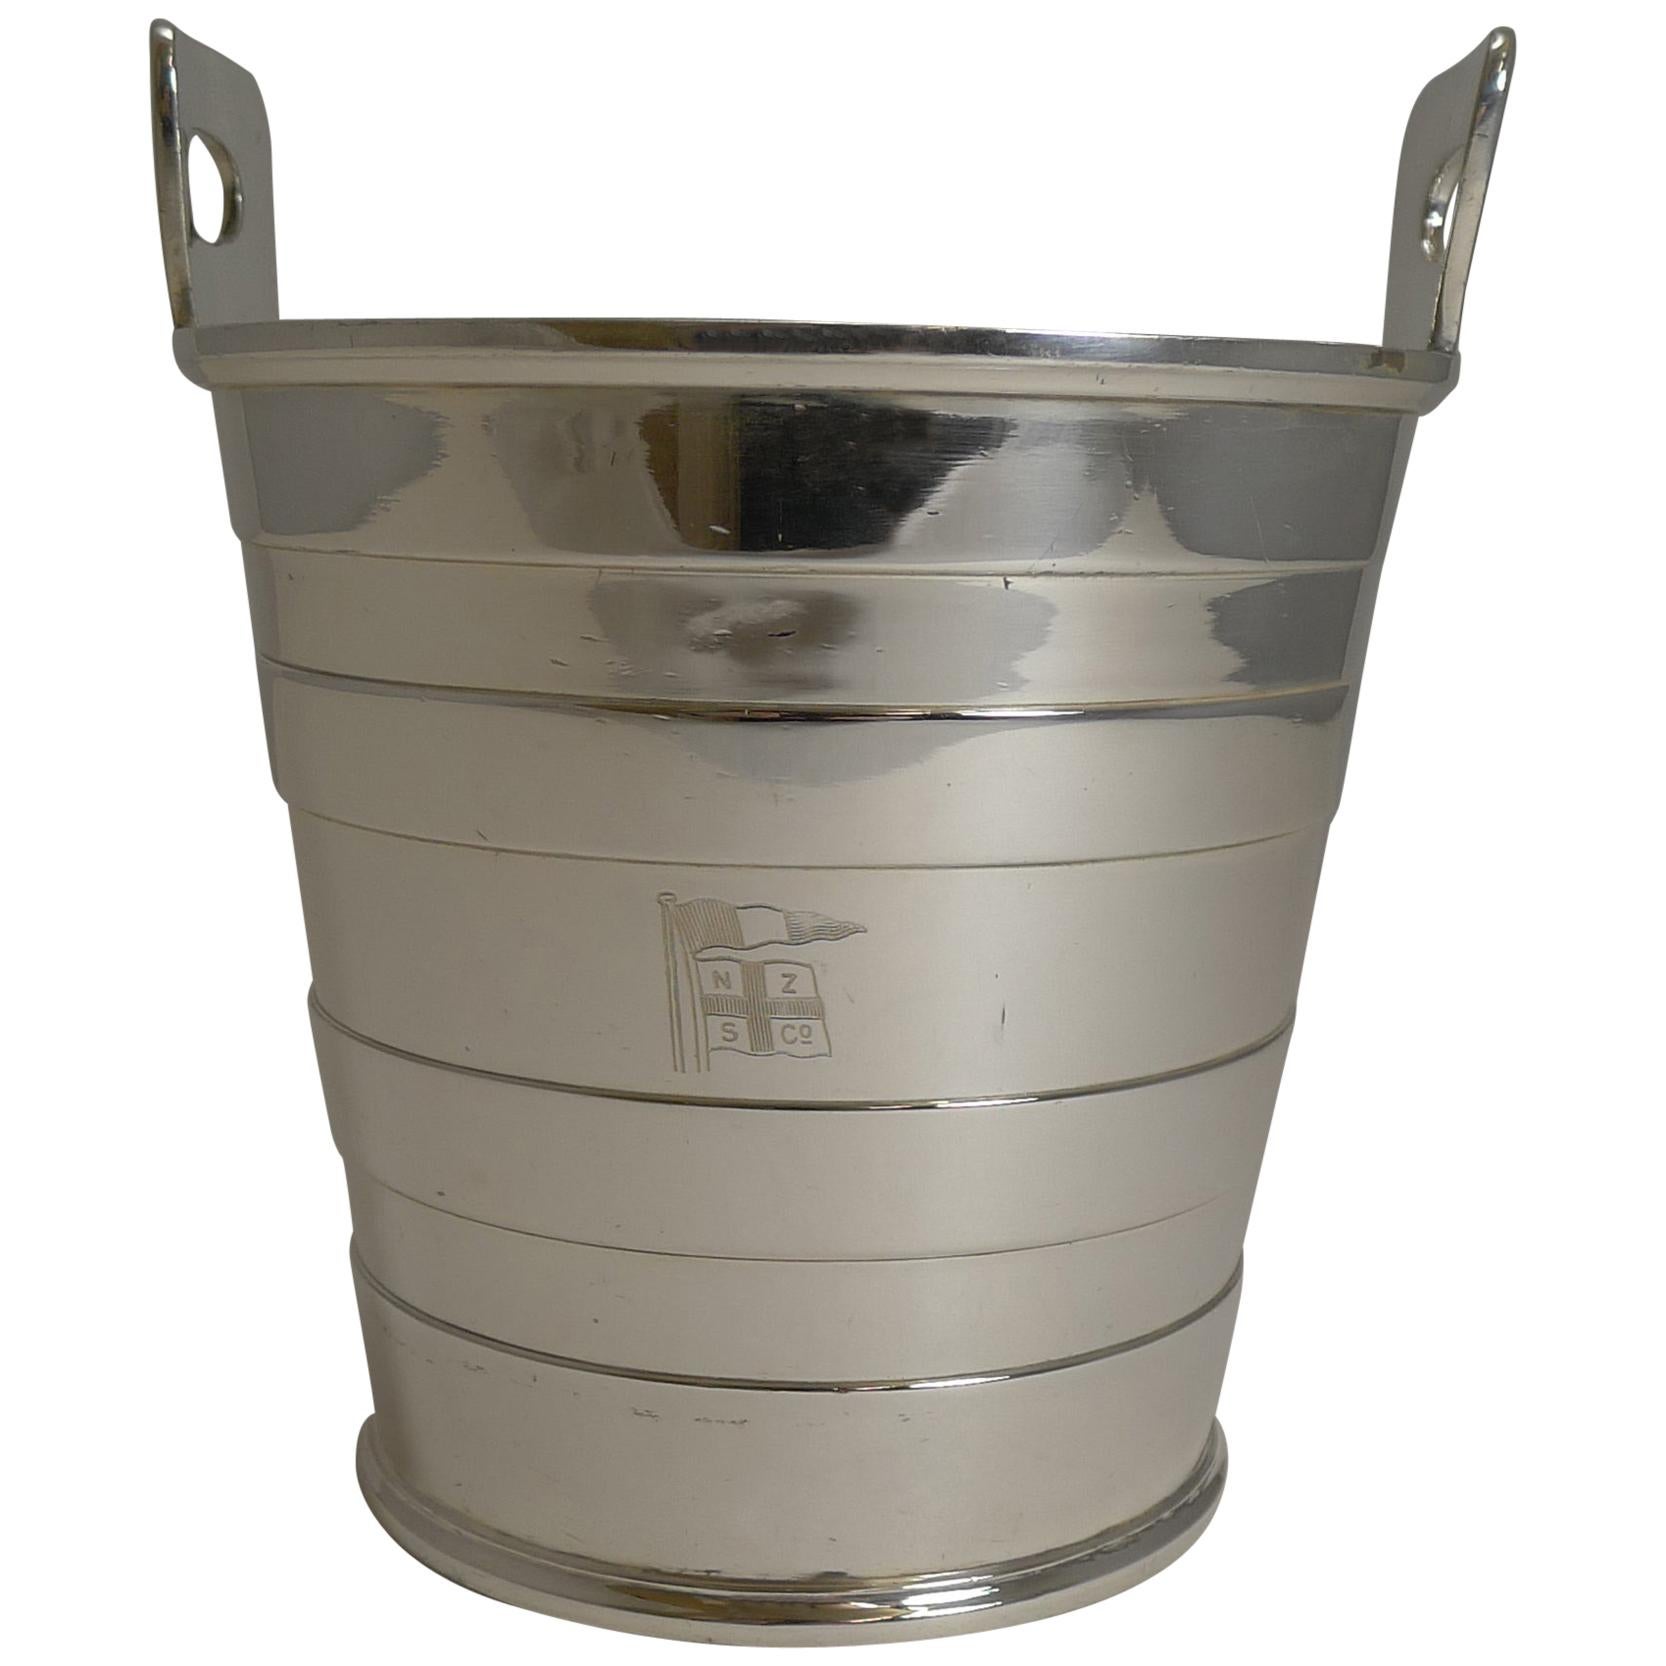 Silver Plated Ice Bucket by Mappin and Webb, New Zealand Shipping Co.